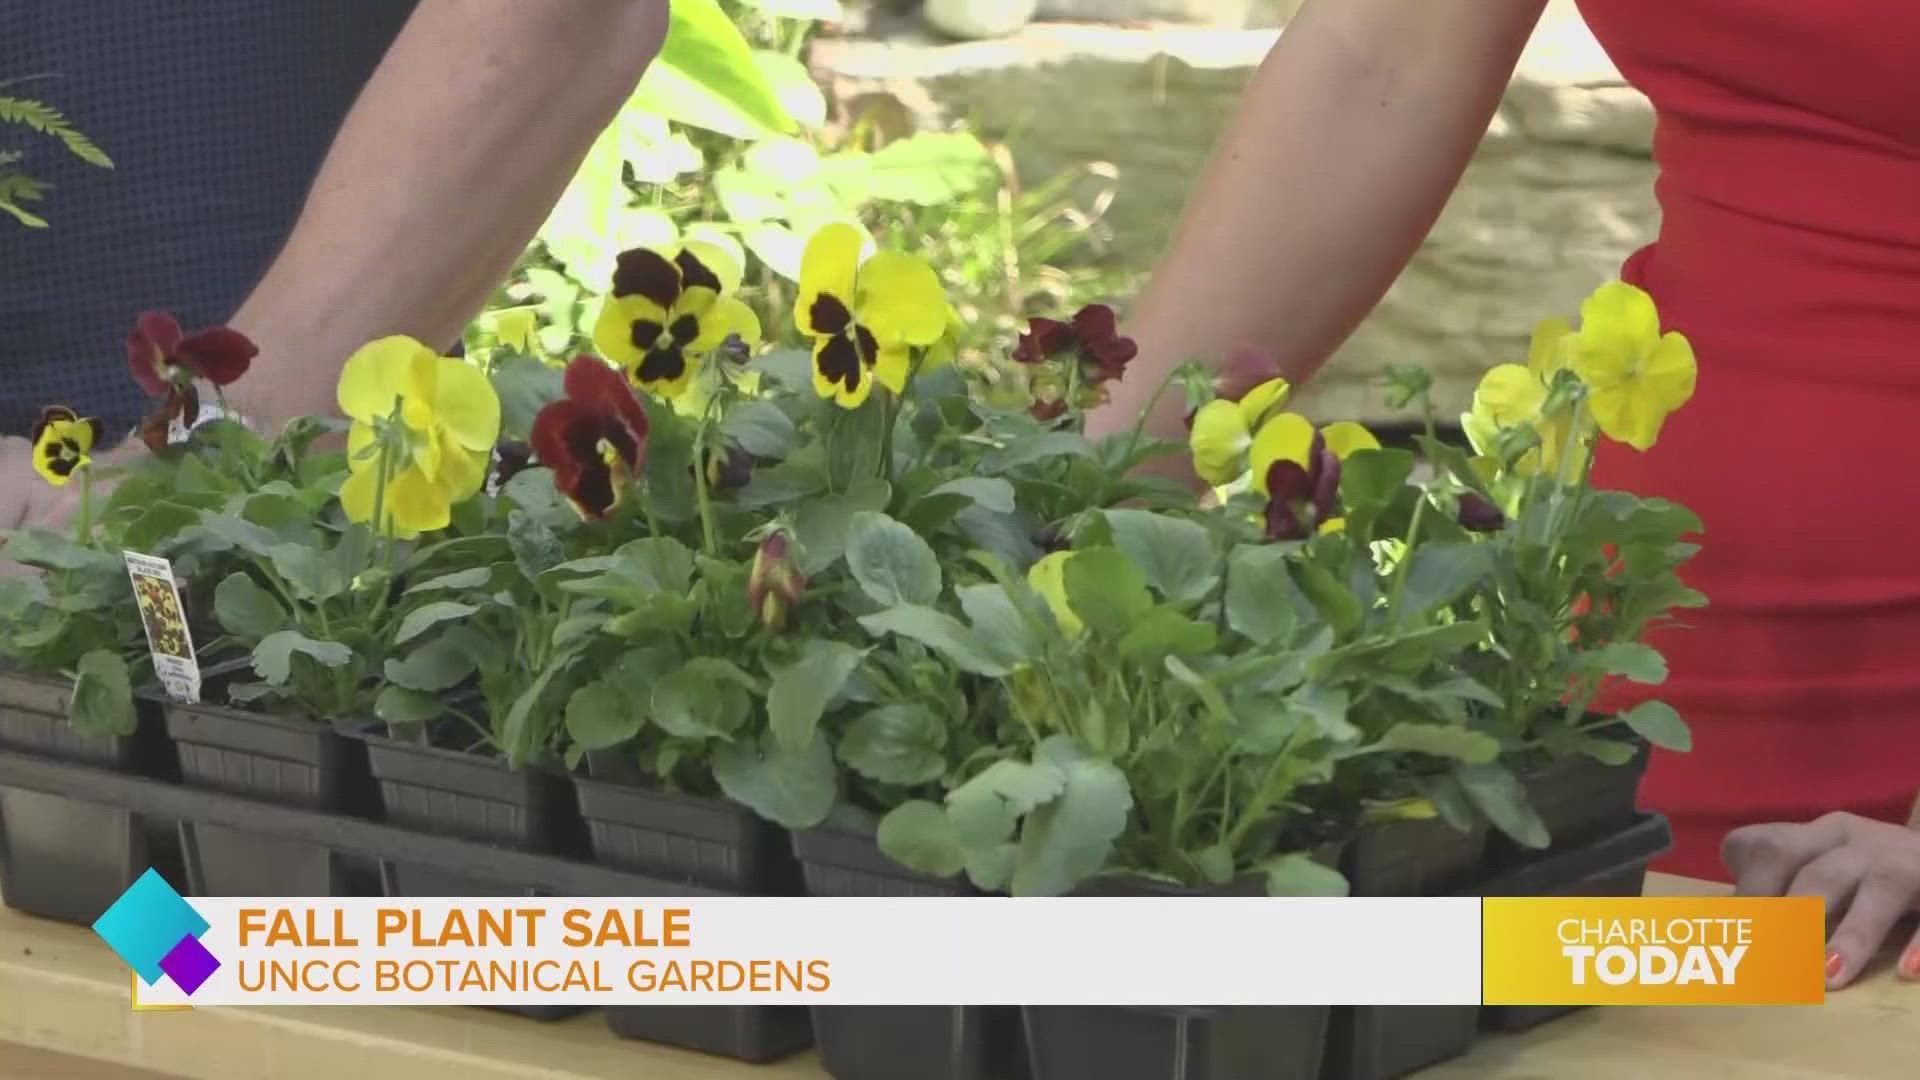 UNC Charlotte Botanical Gardens is hosting a fall plant sale